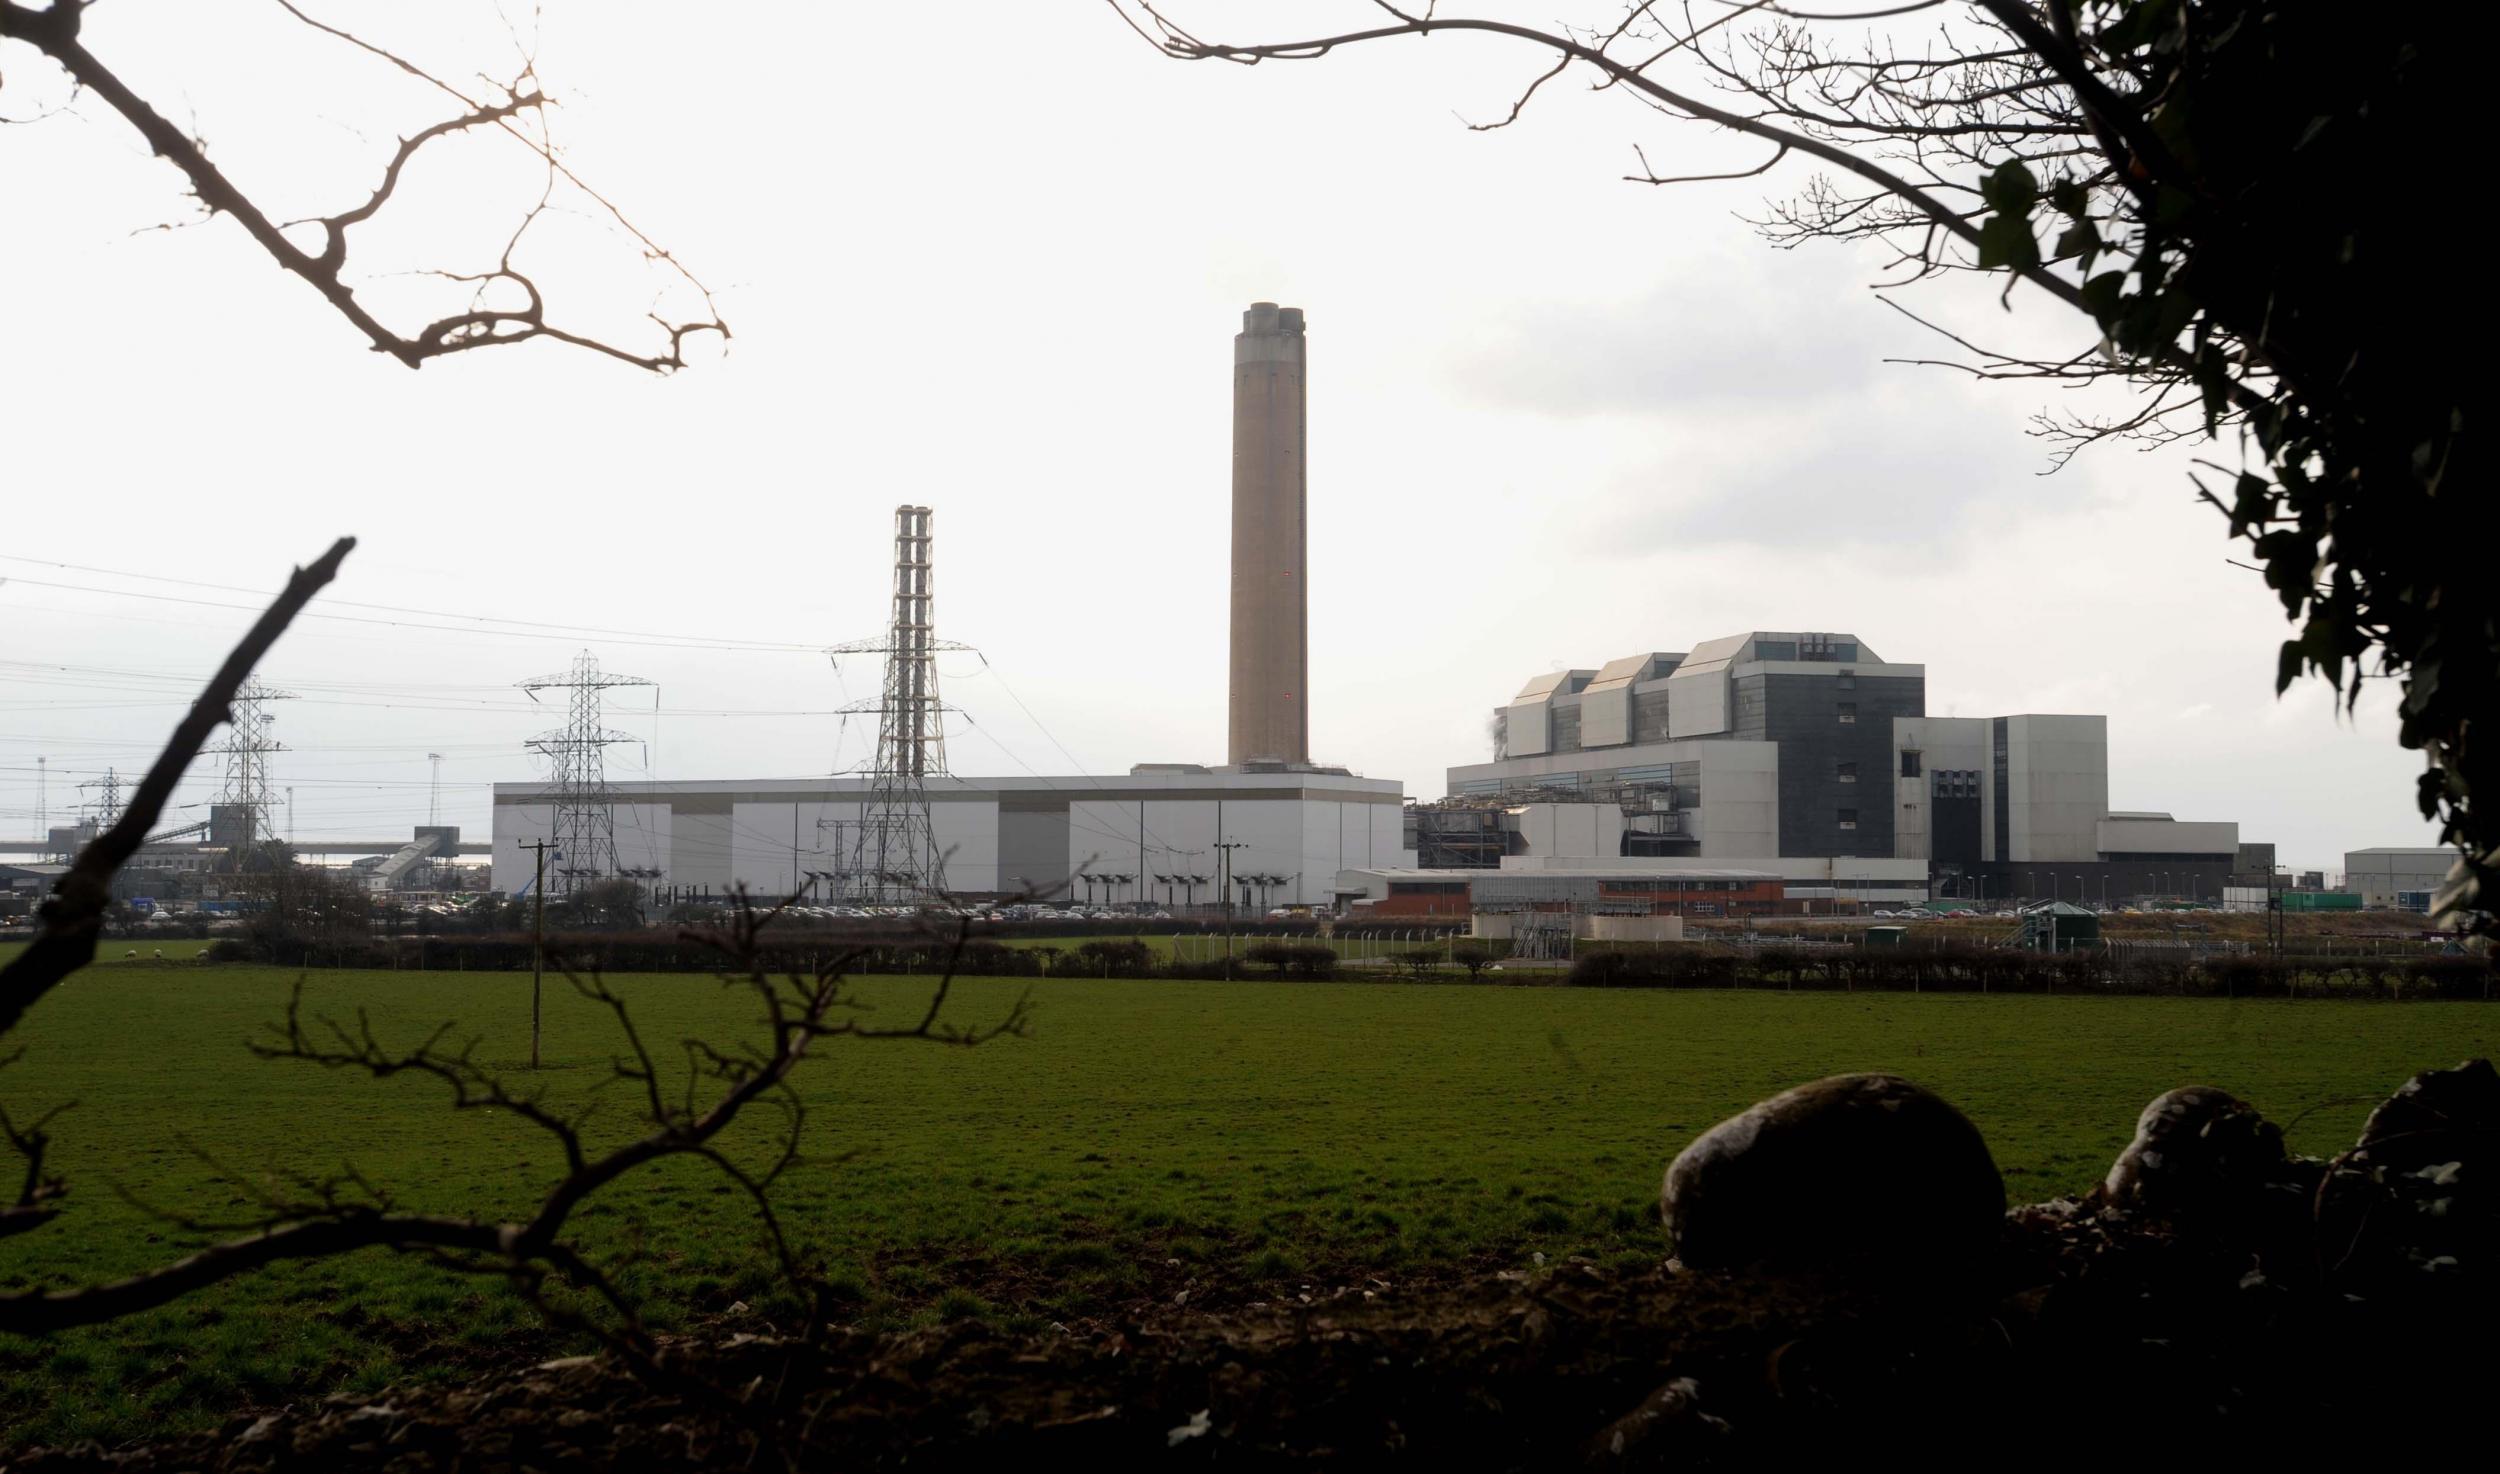 Aberthaw Power Station in Wales was ruled to have breached emissions limits by the European Court of Justice